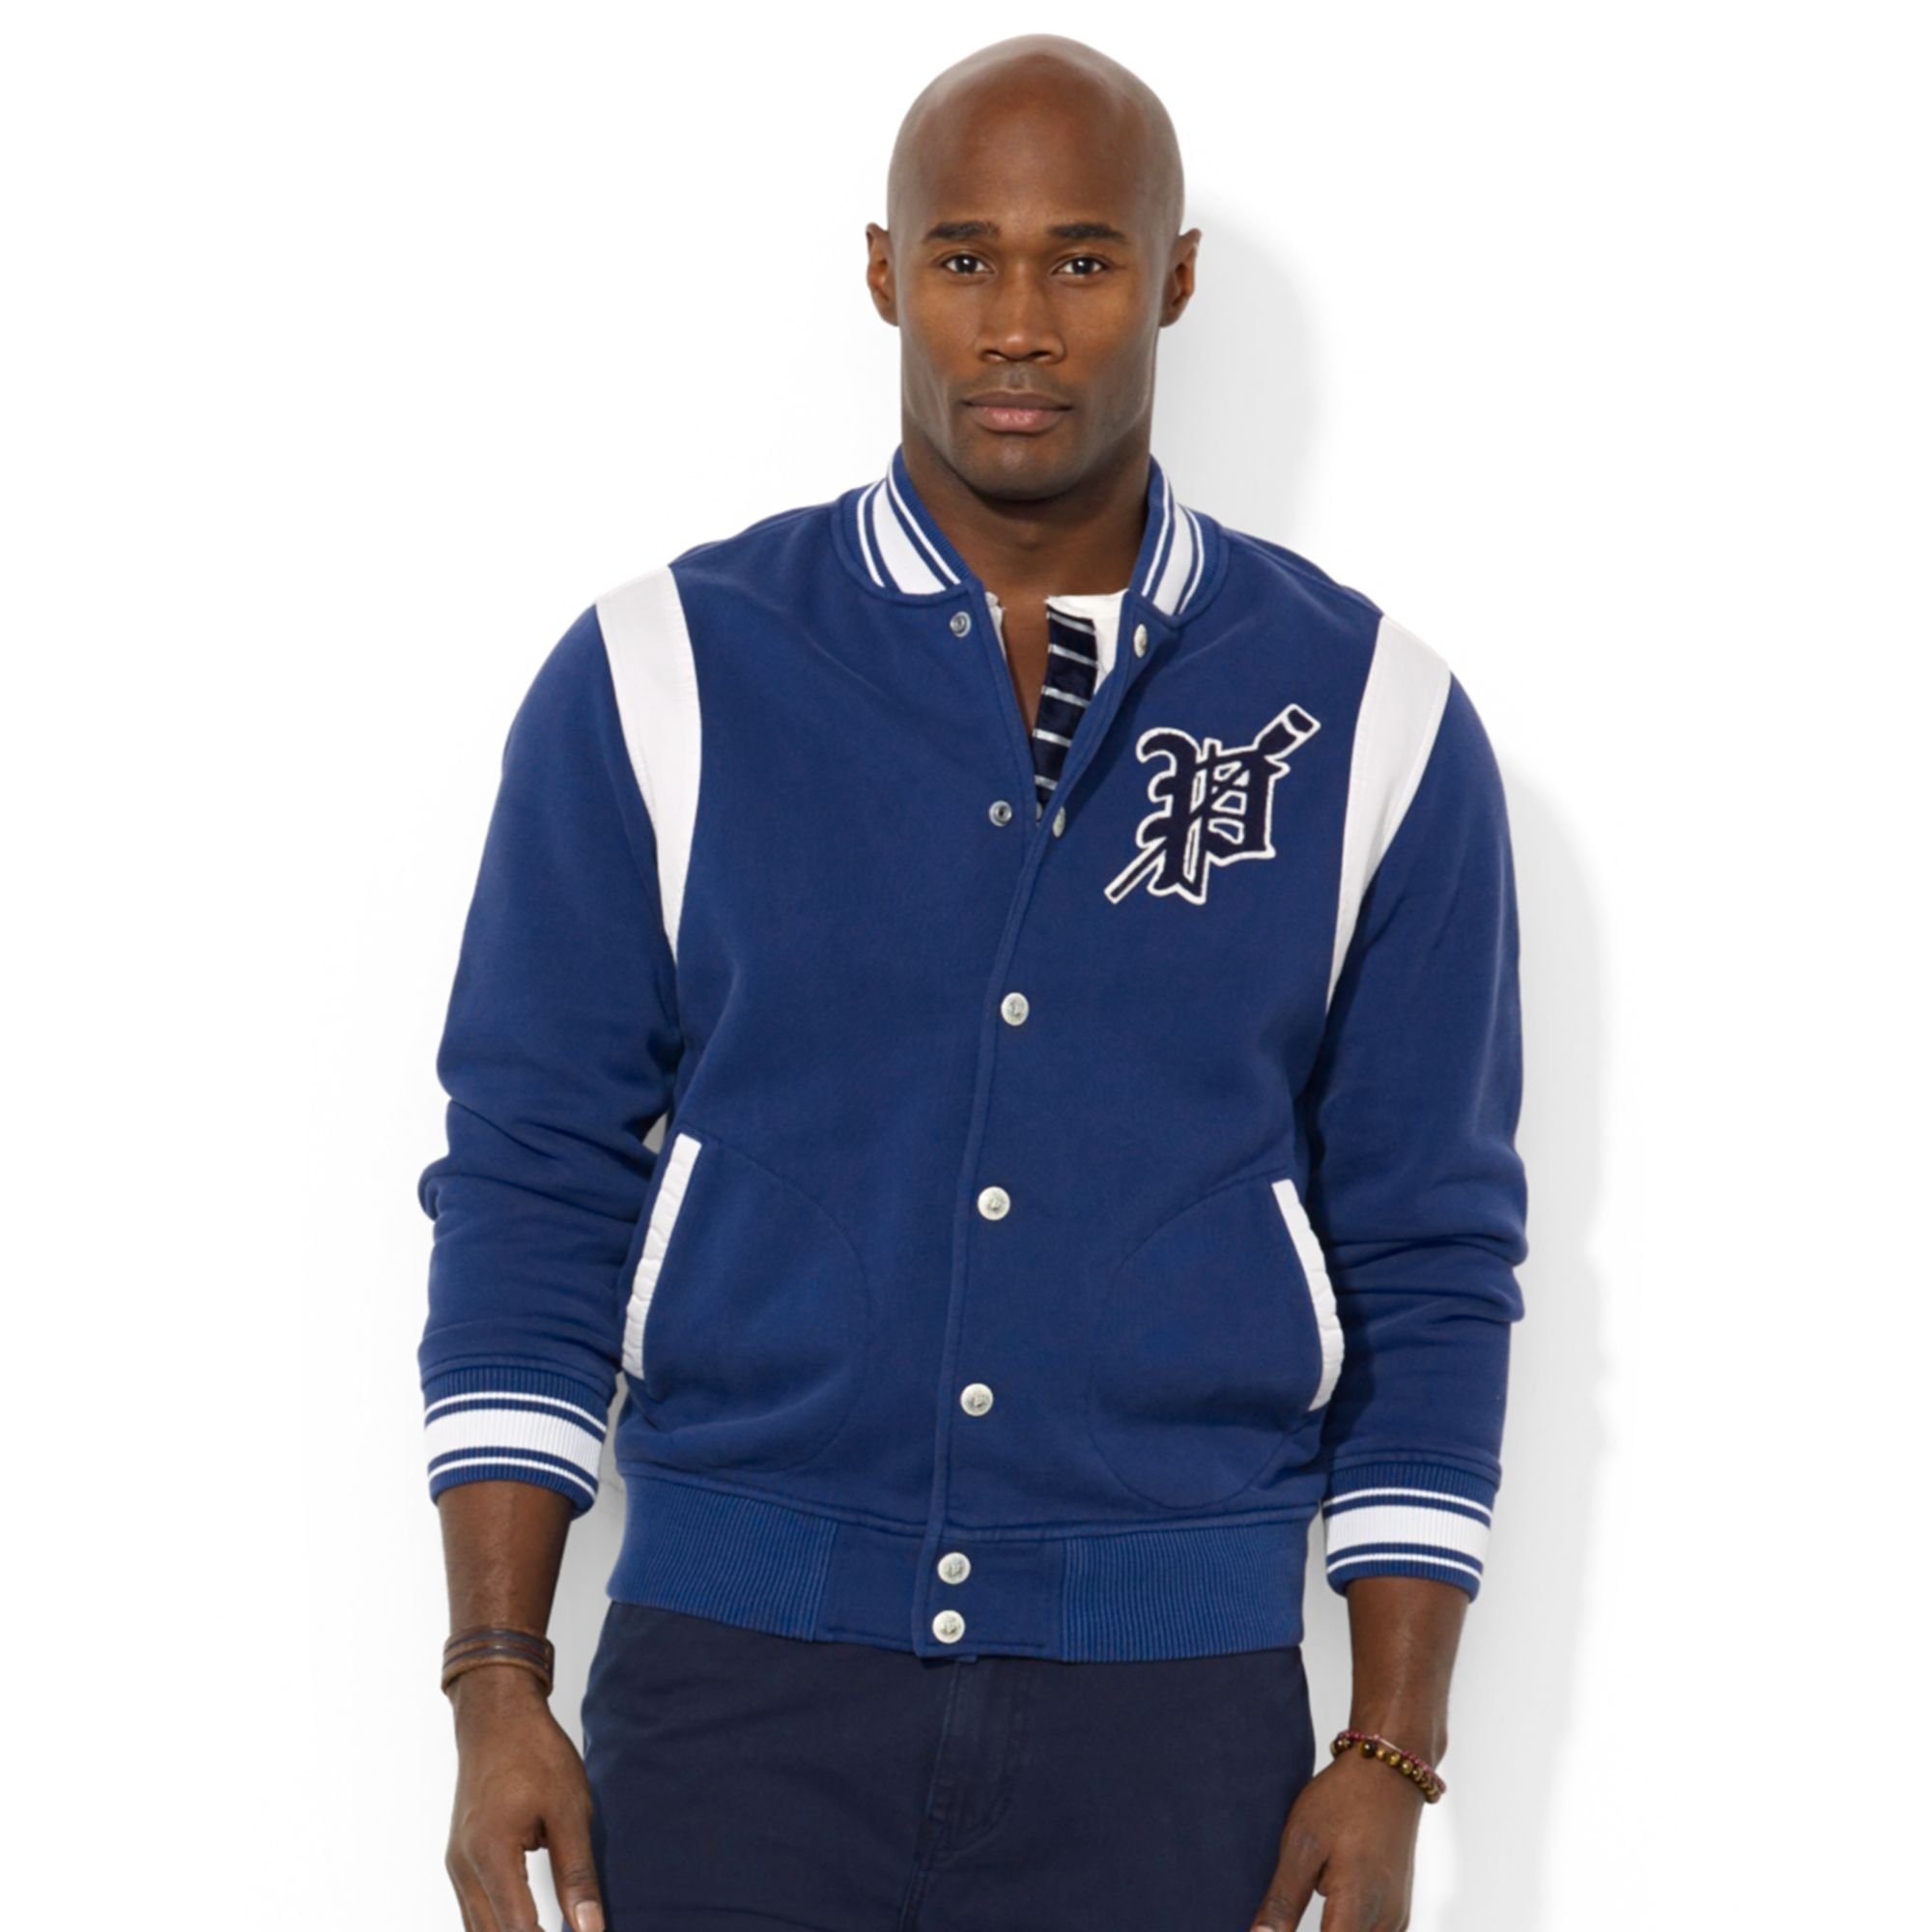 polo ralph lauren big and tall jackets